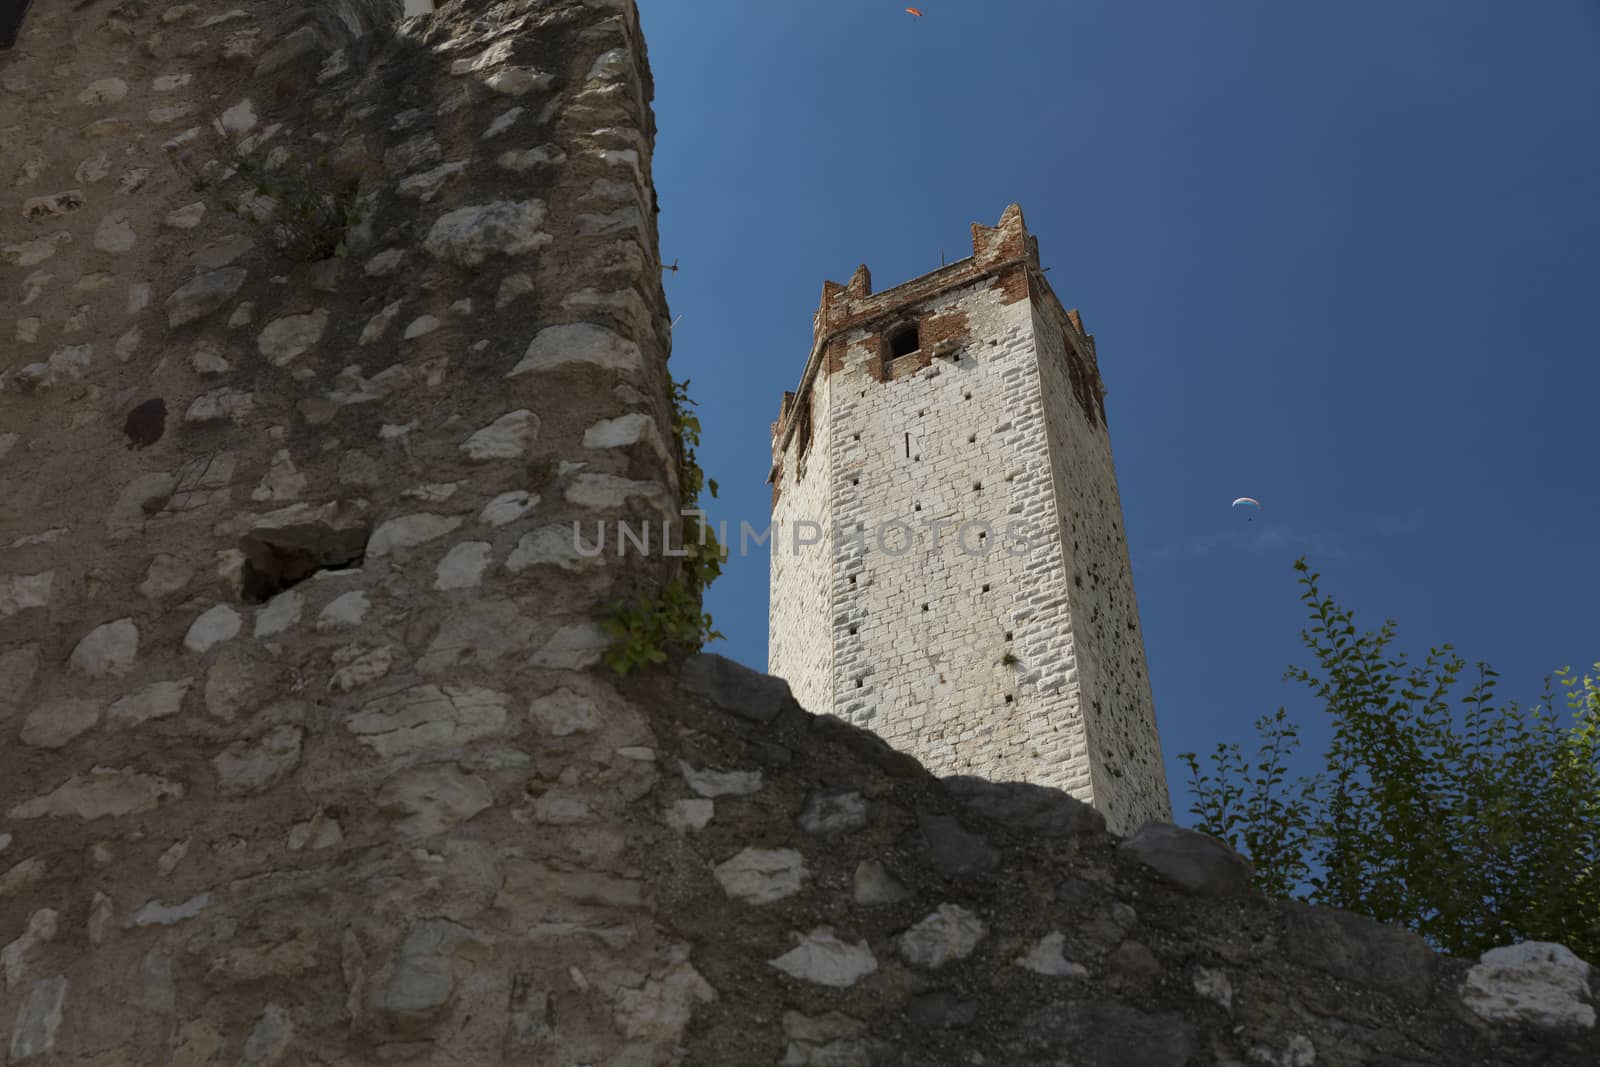 Malcesine, Lake Garda, Italy, August 2019, A view of the  Castello Scaligero